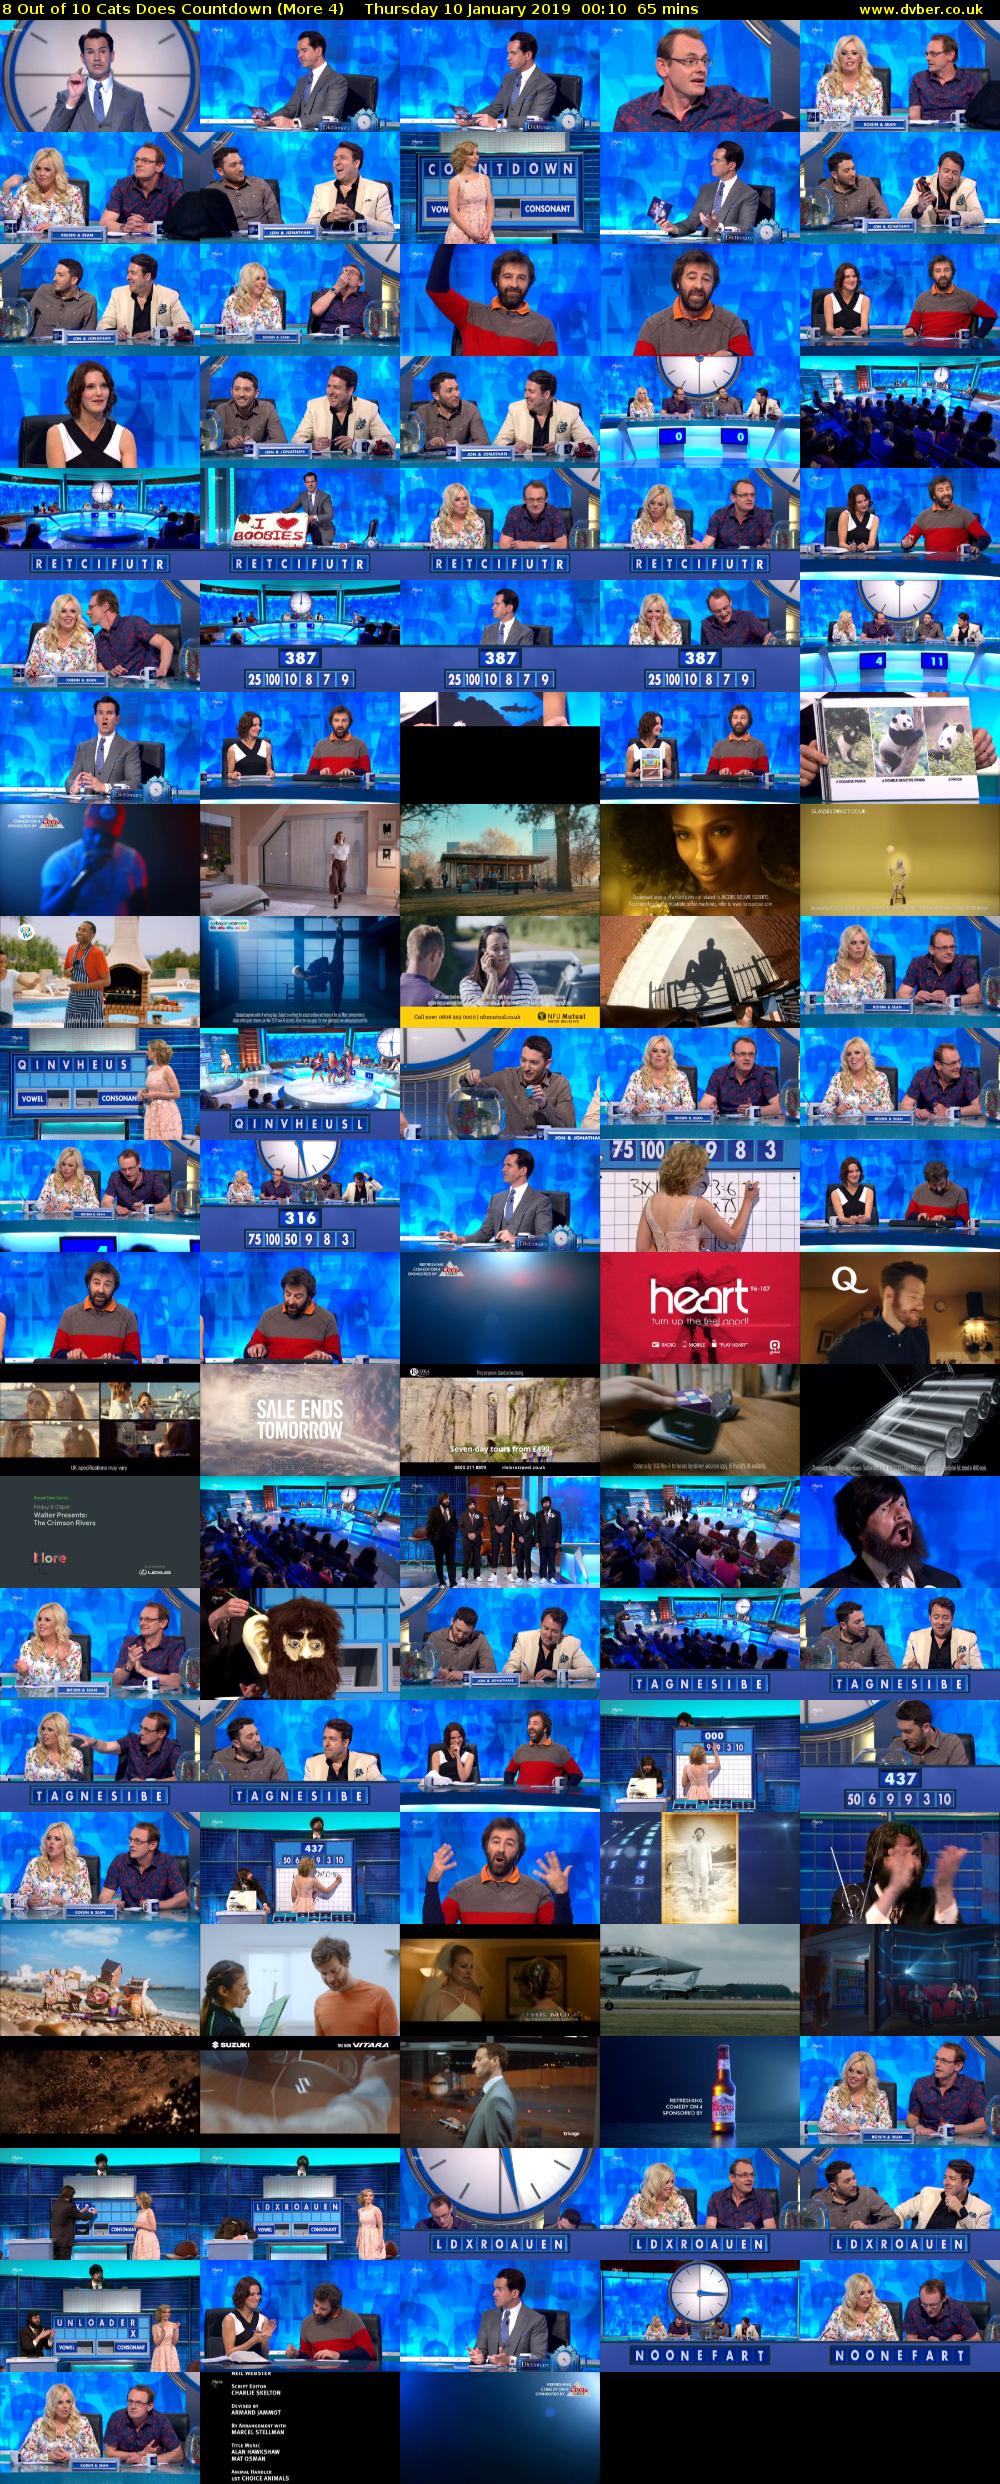 8 Out of 10 Cats Does Countdown (More 4) Thursday 10 January 2019 00:10 - 01:15